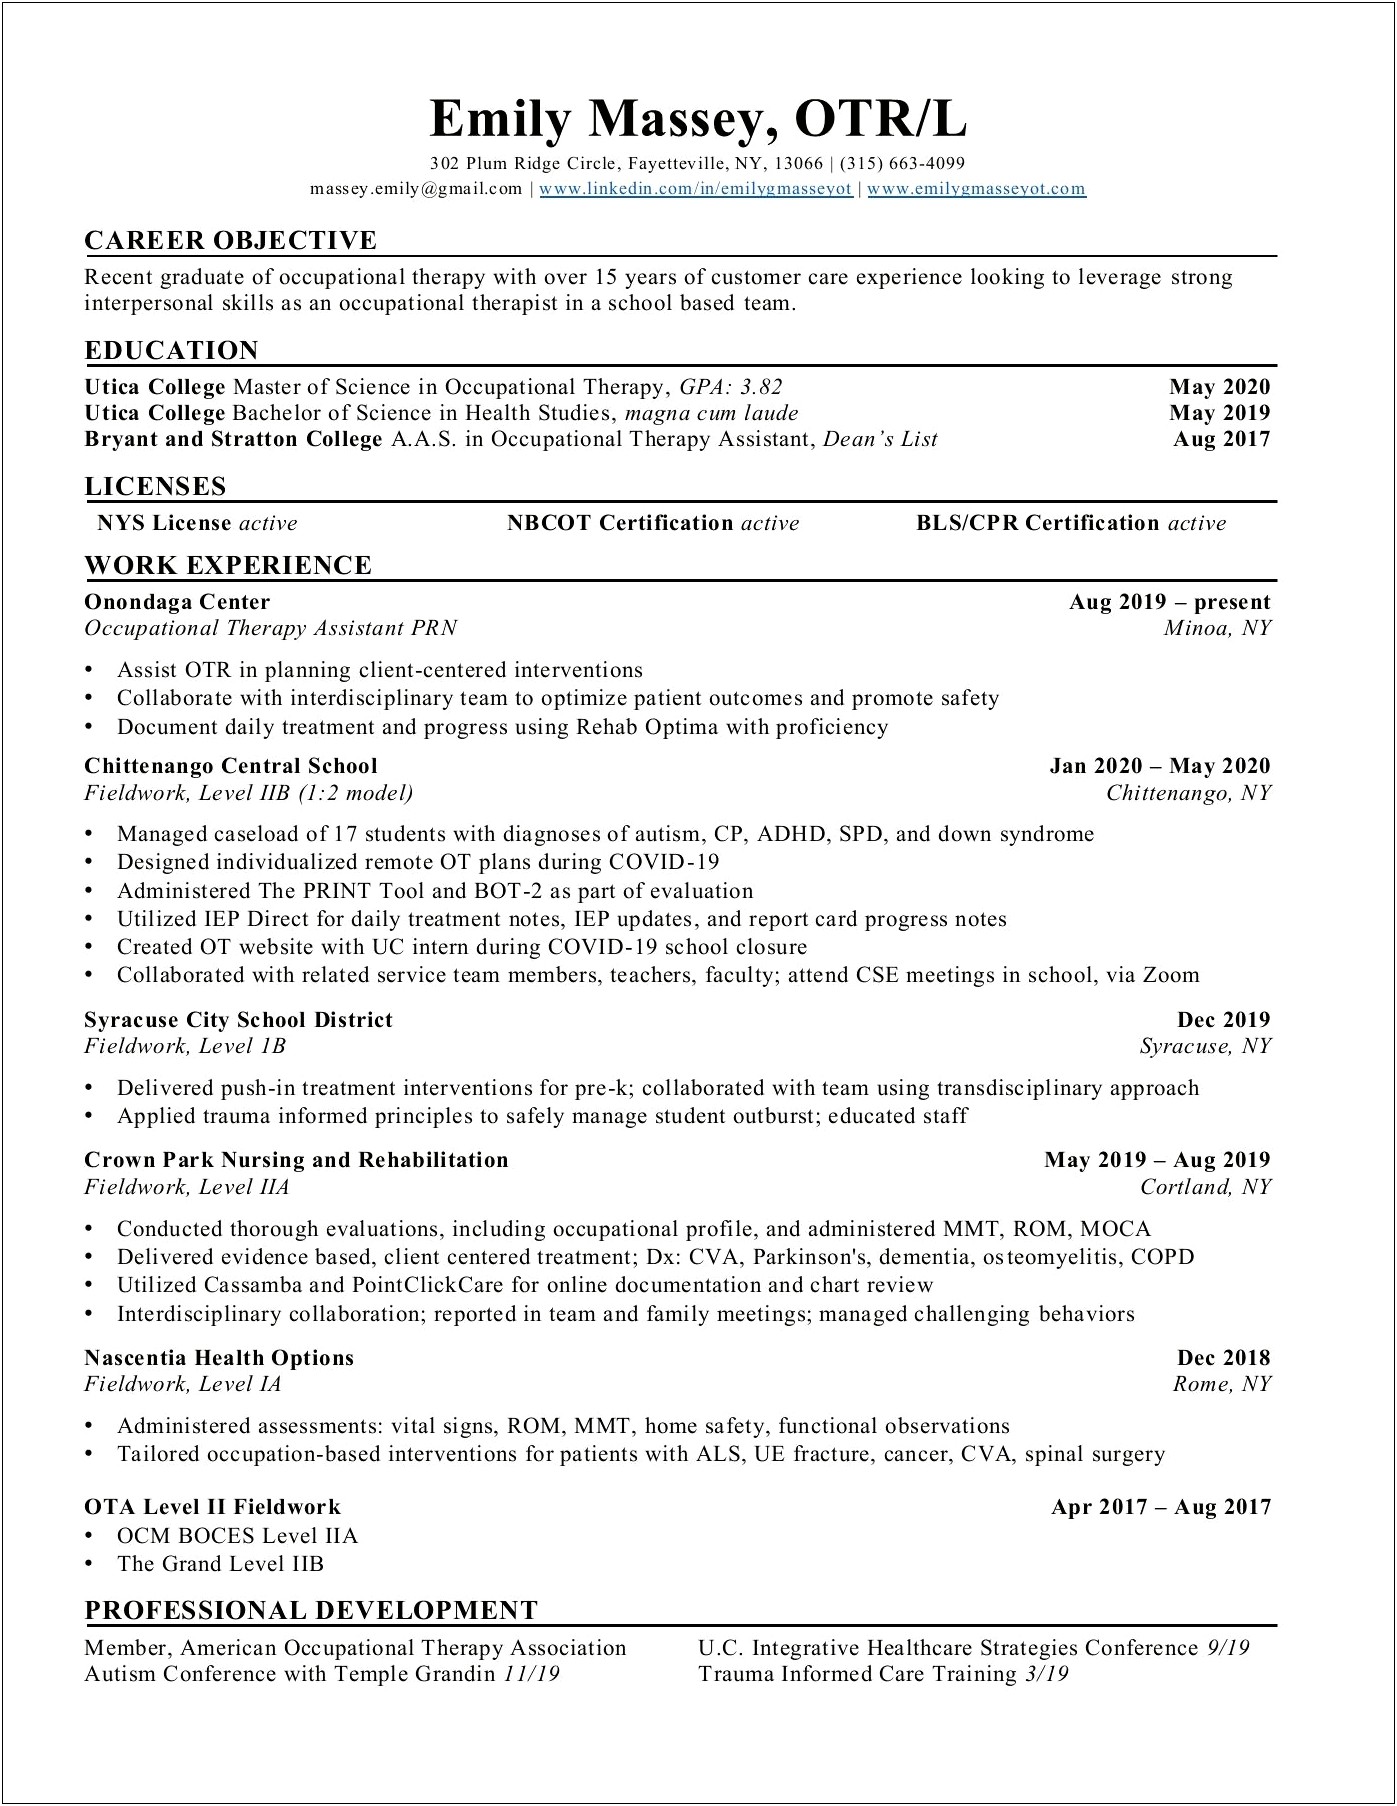 Occupational Therapy Assistant Summary For Resume